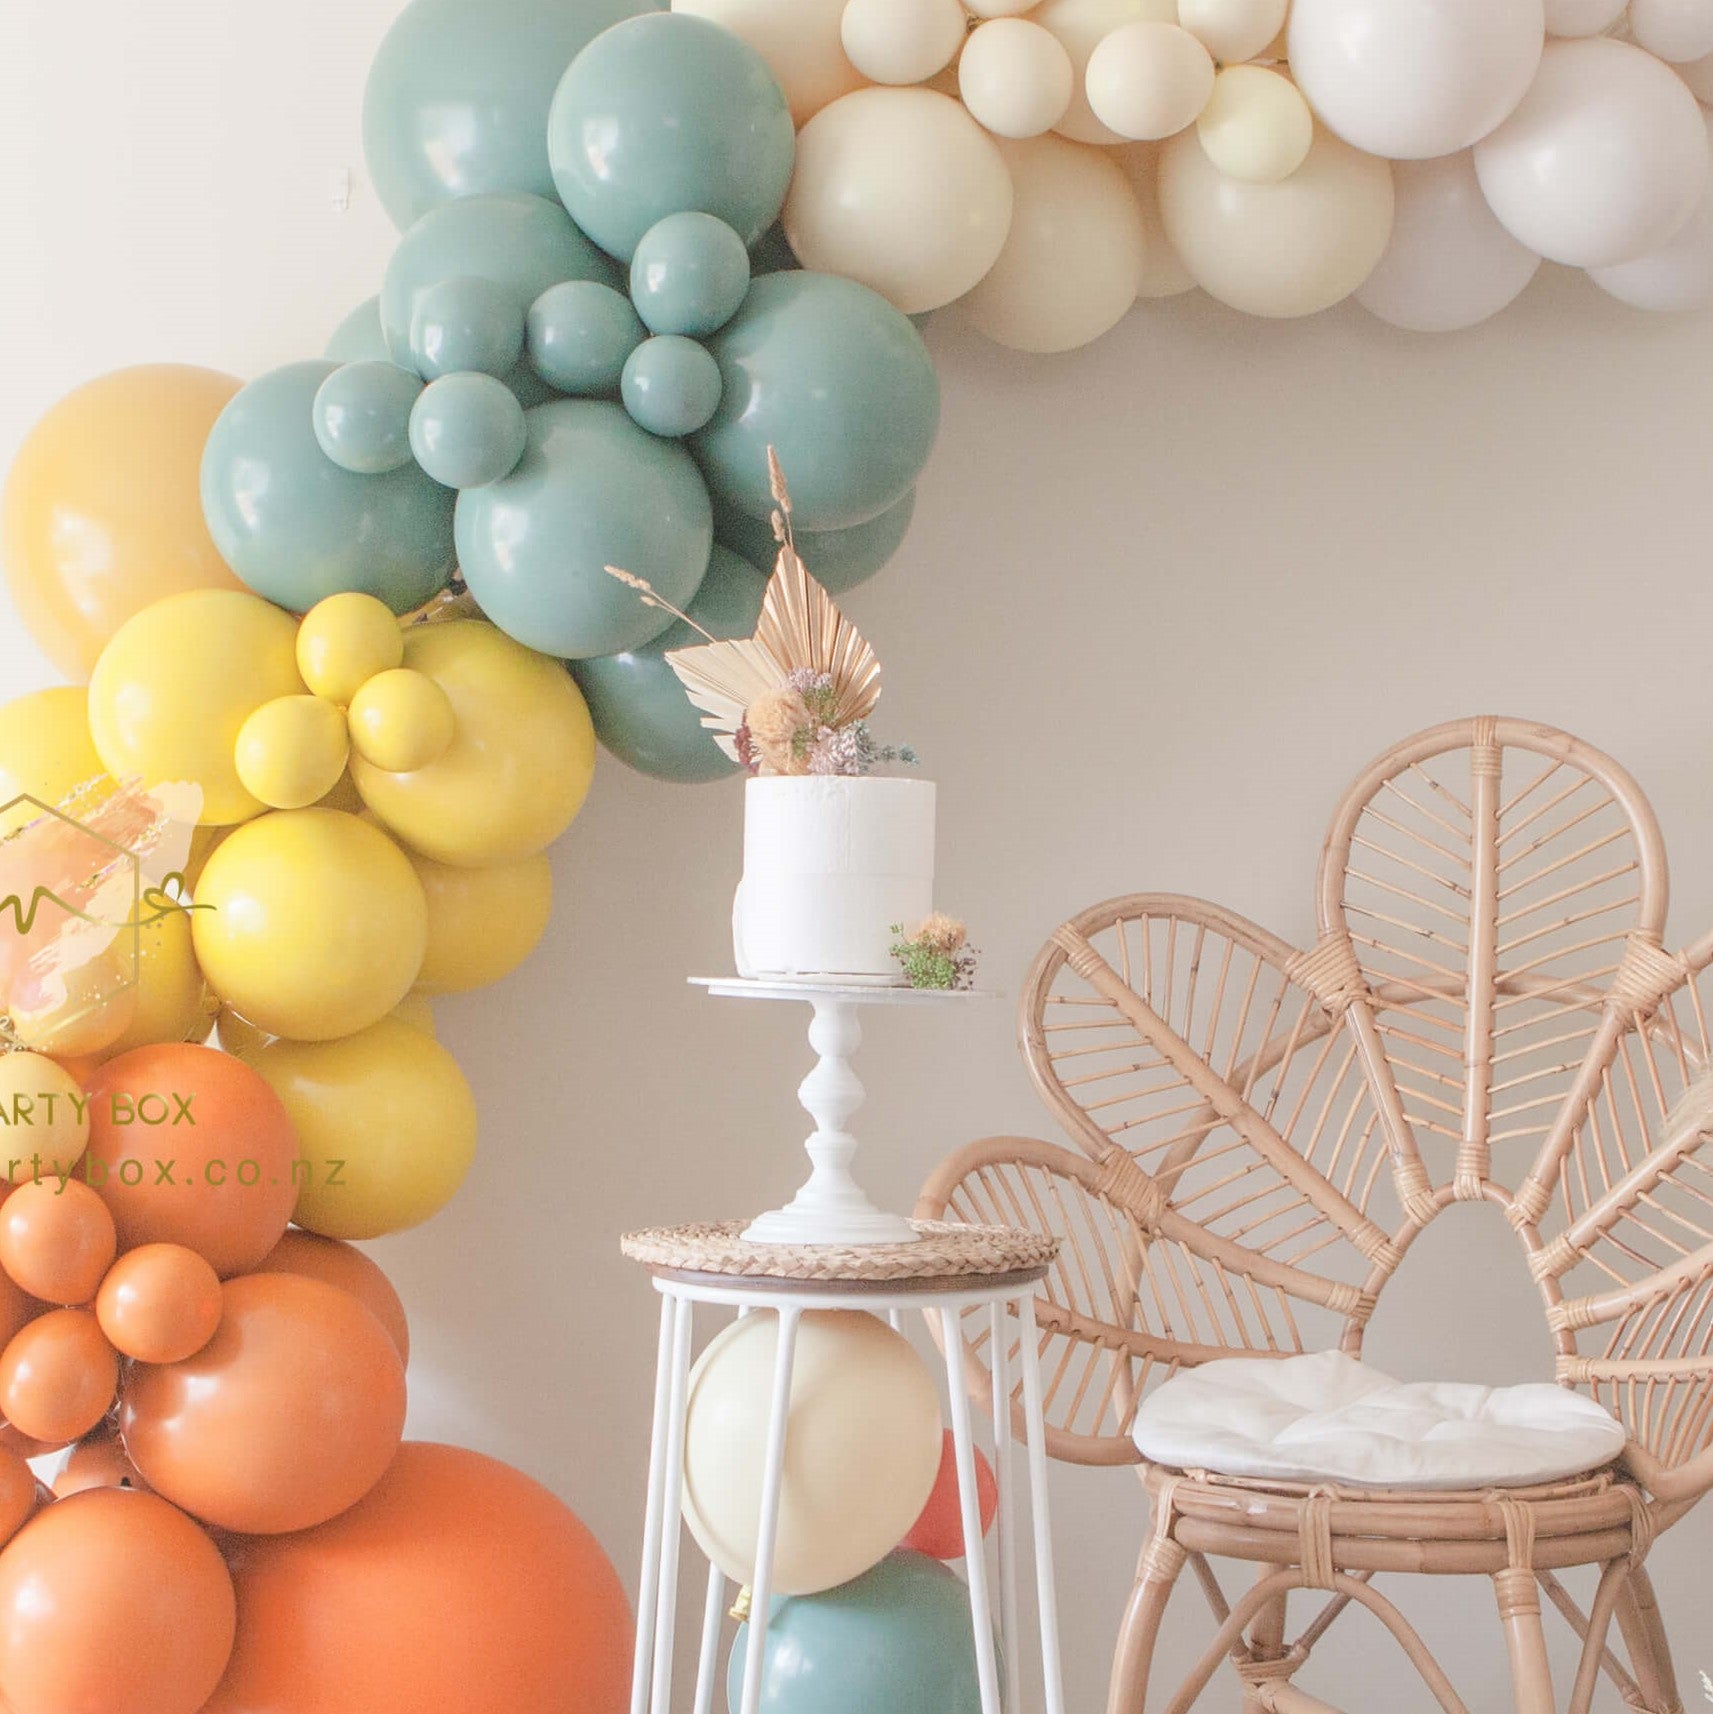 My Party Box Luxe Rainforest Adventure Balloon Garland DIY Kit with Bright Orange, Bright Mustard, Solid Willow, yellow, and White sand latex balloon